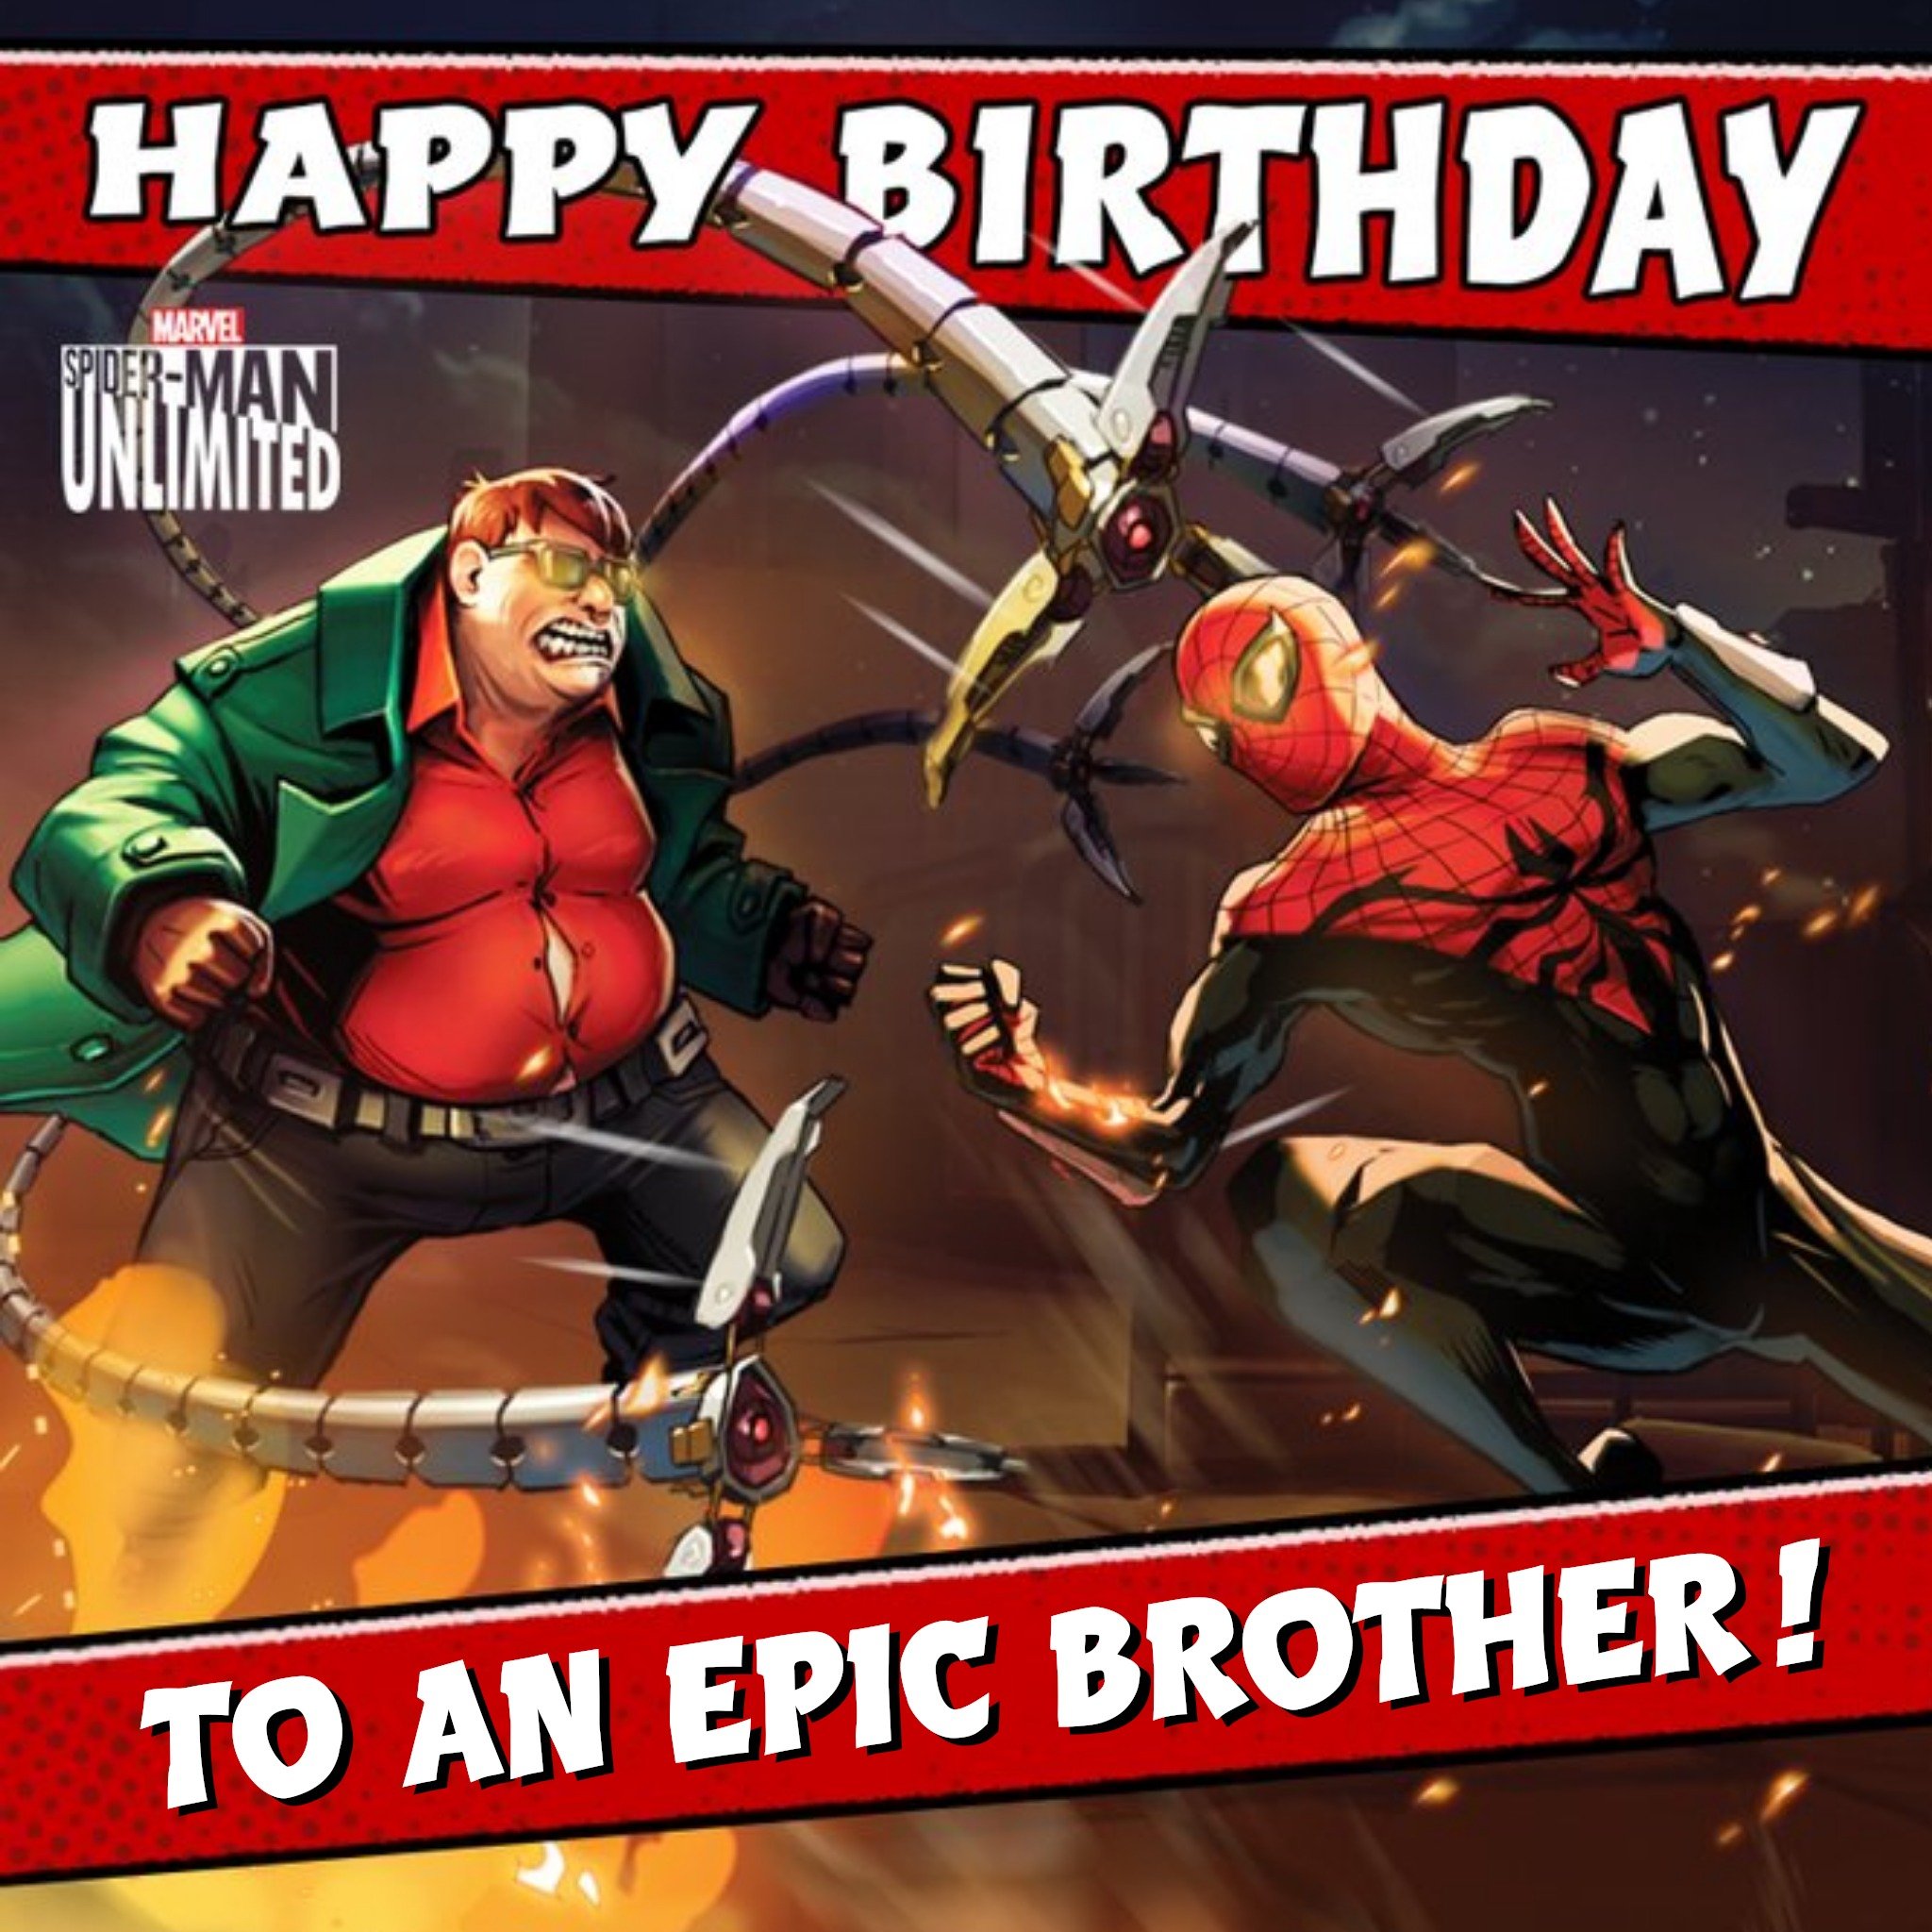 Marvel Spiderman Unlimited Epic Brother Gaming Birthday Card, Square